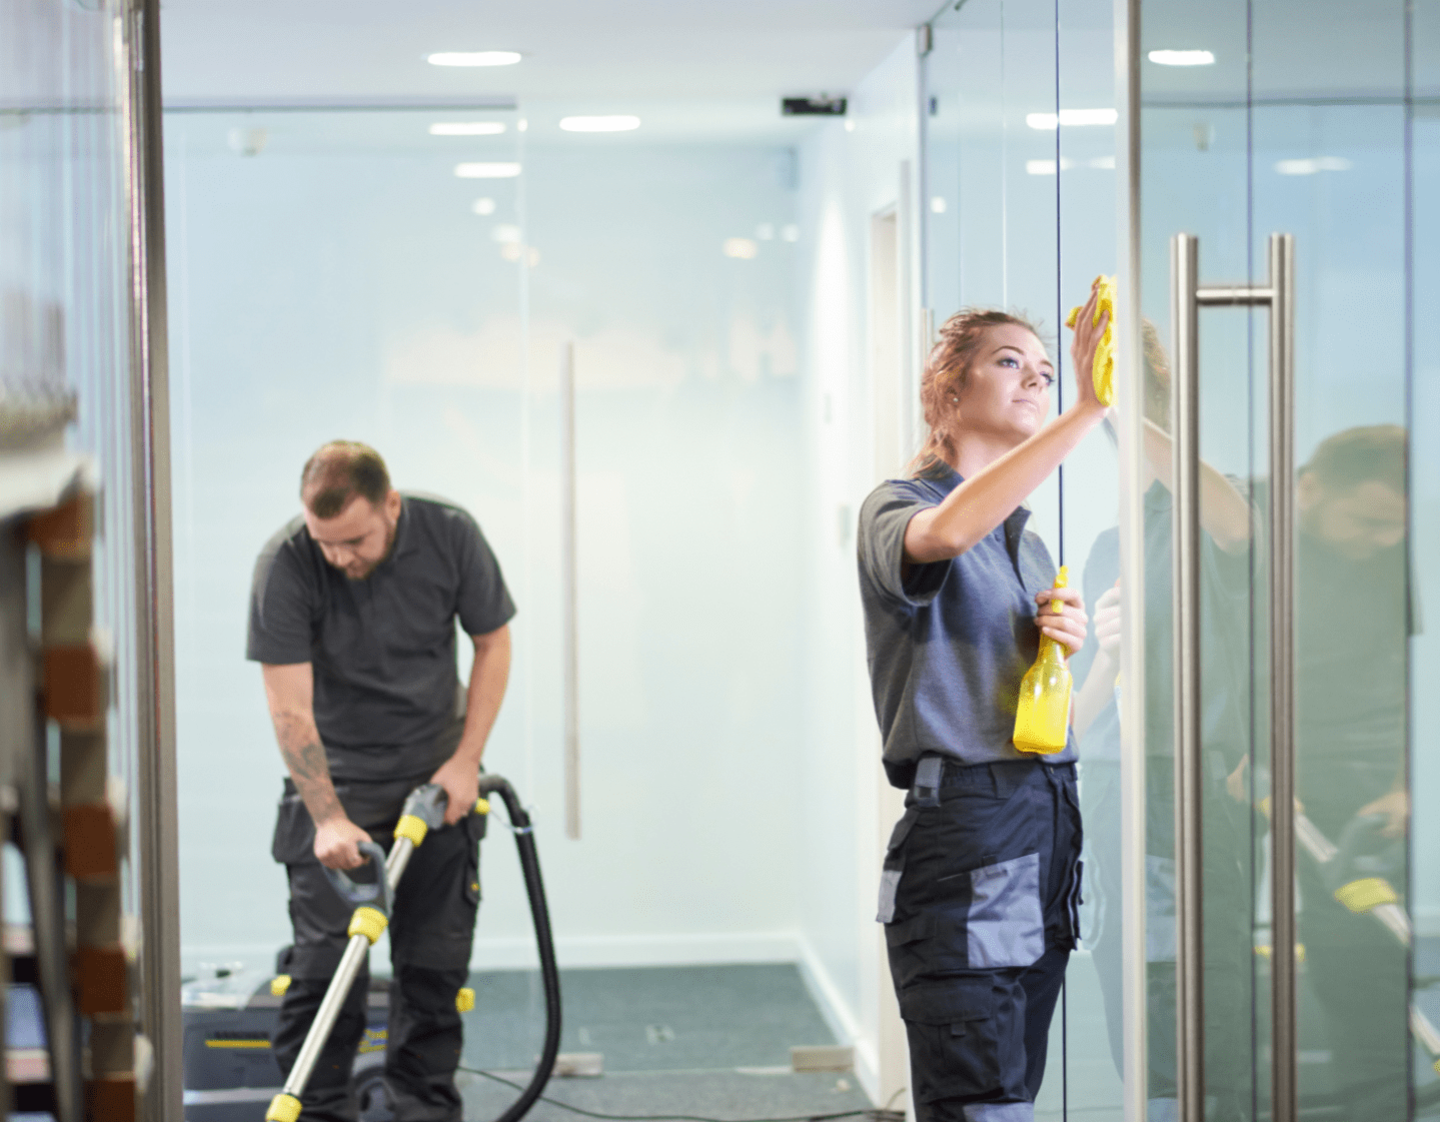 A man and a woman cleaning an office building